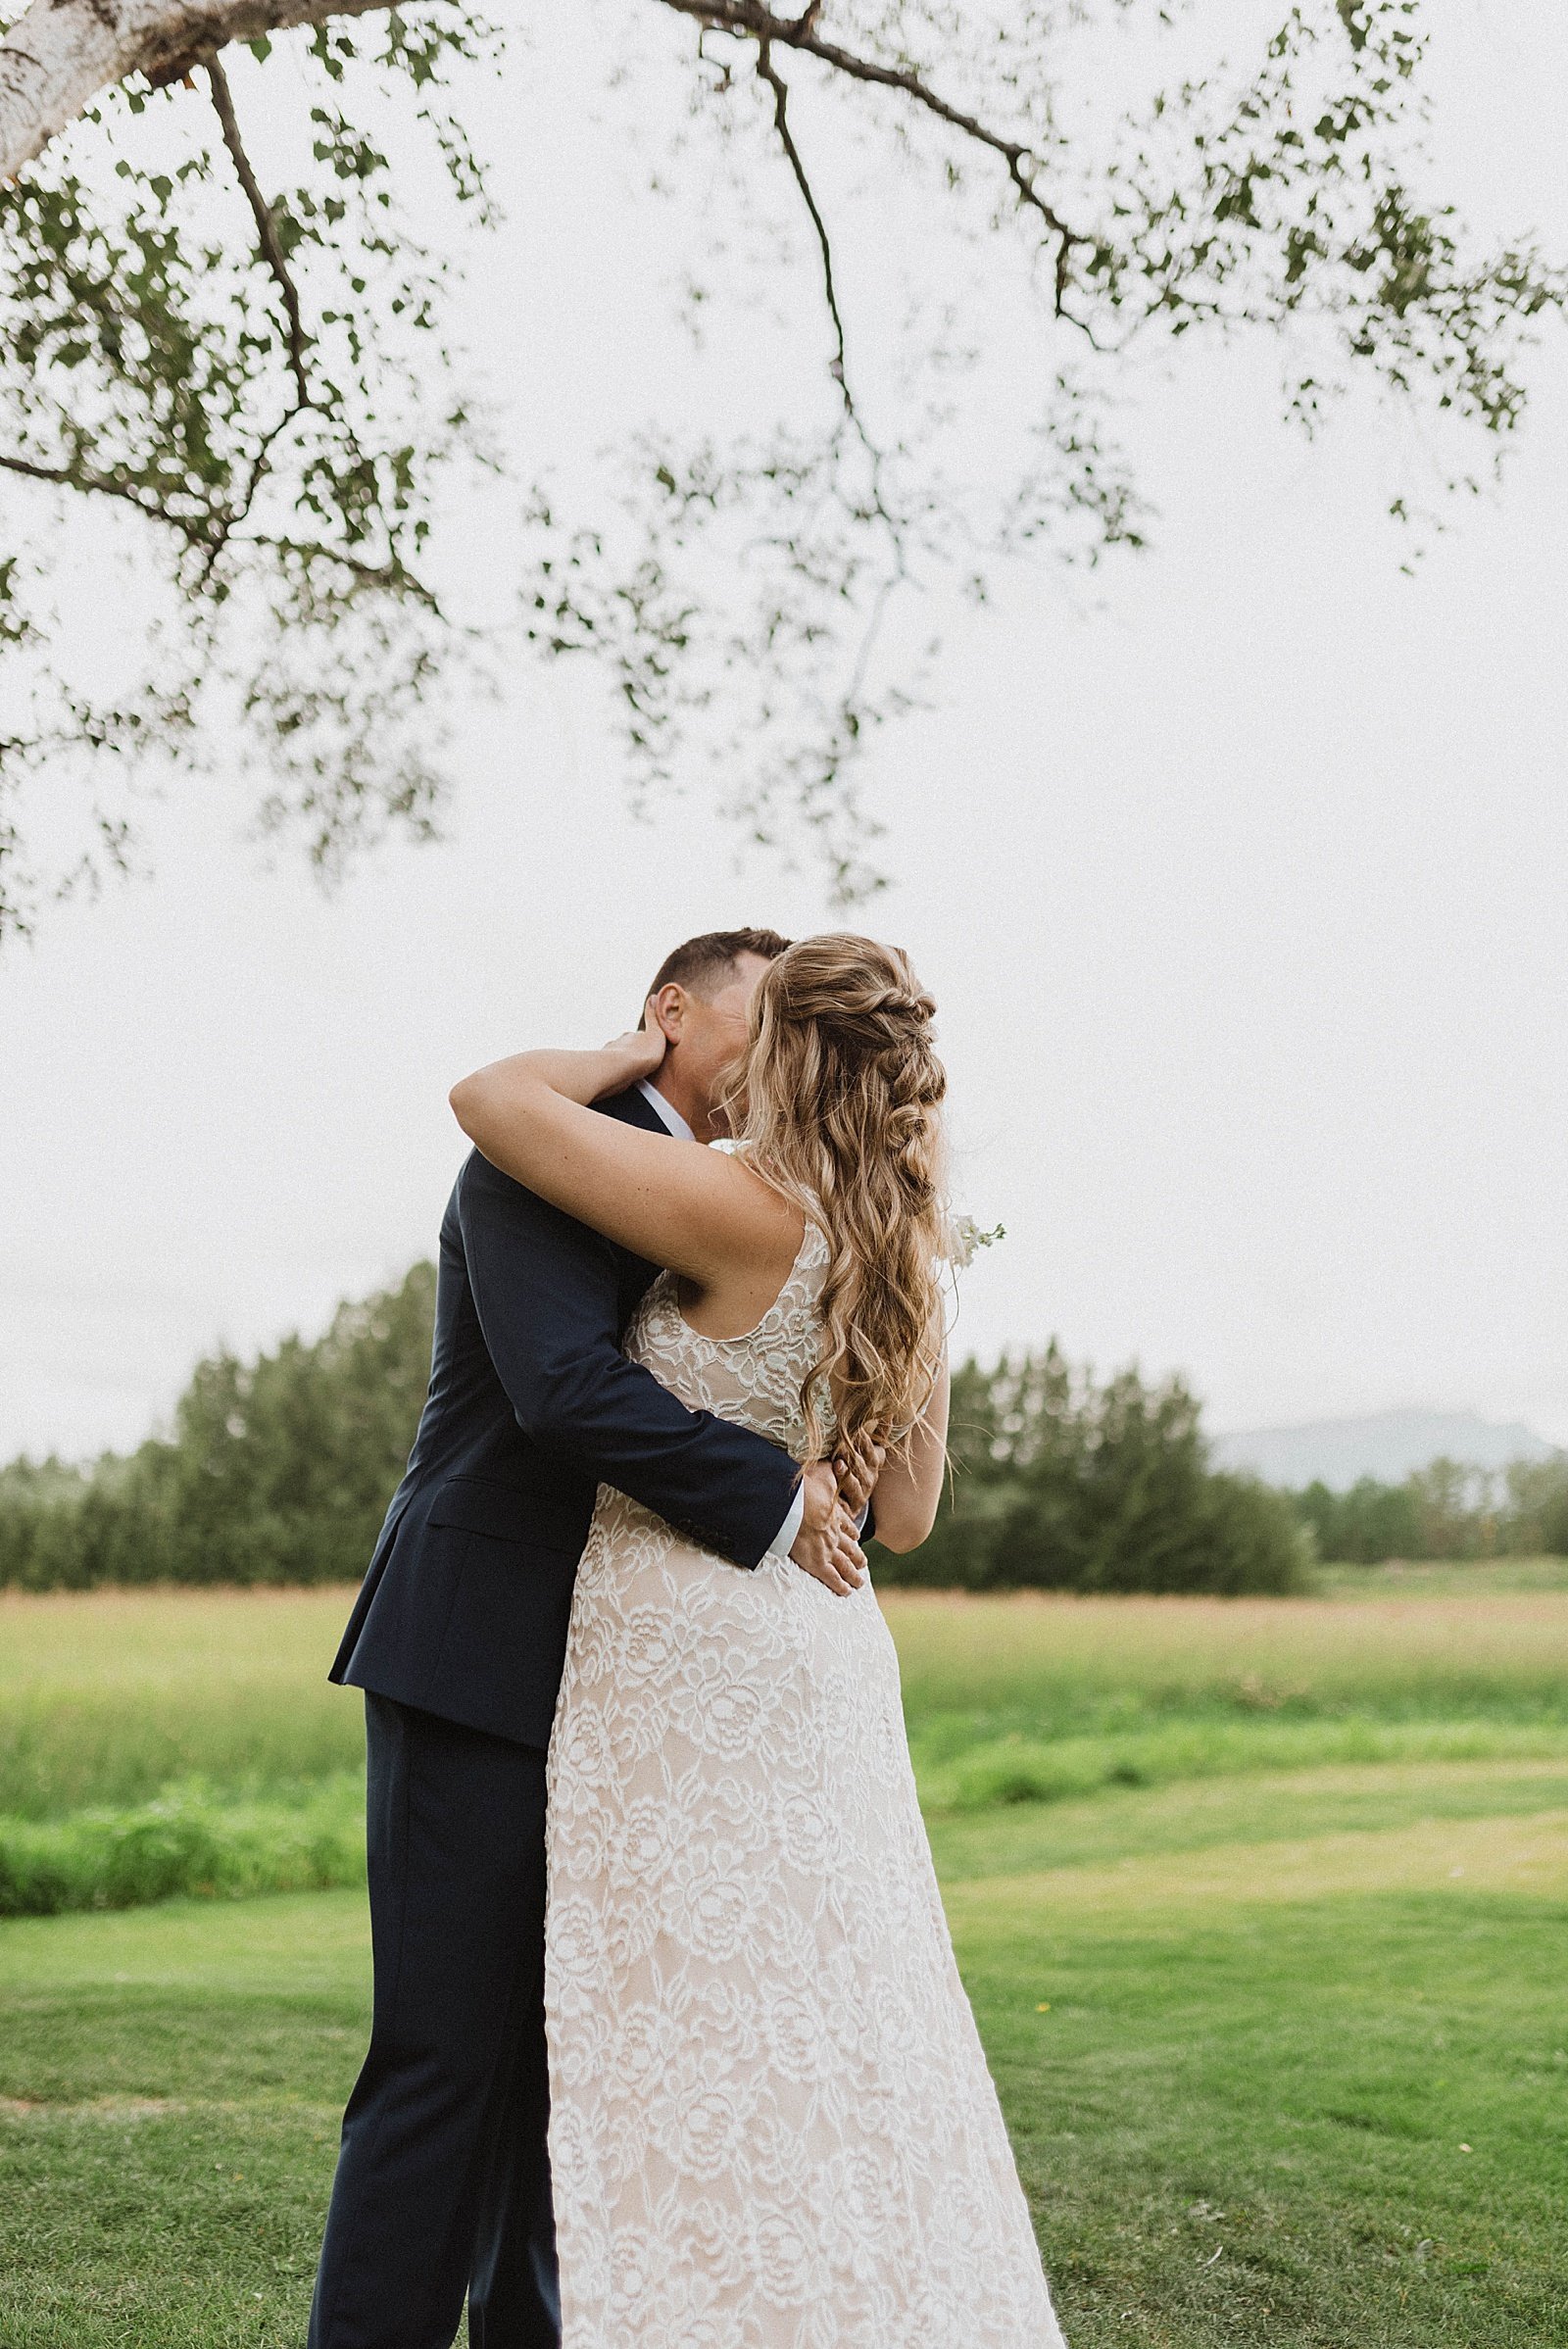  Groom hugging a bride a lace dress  in a field before their ceremony.  